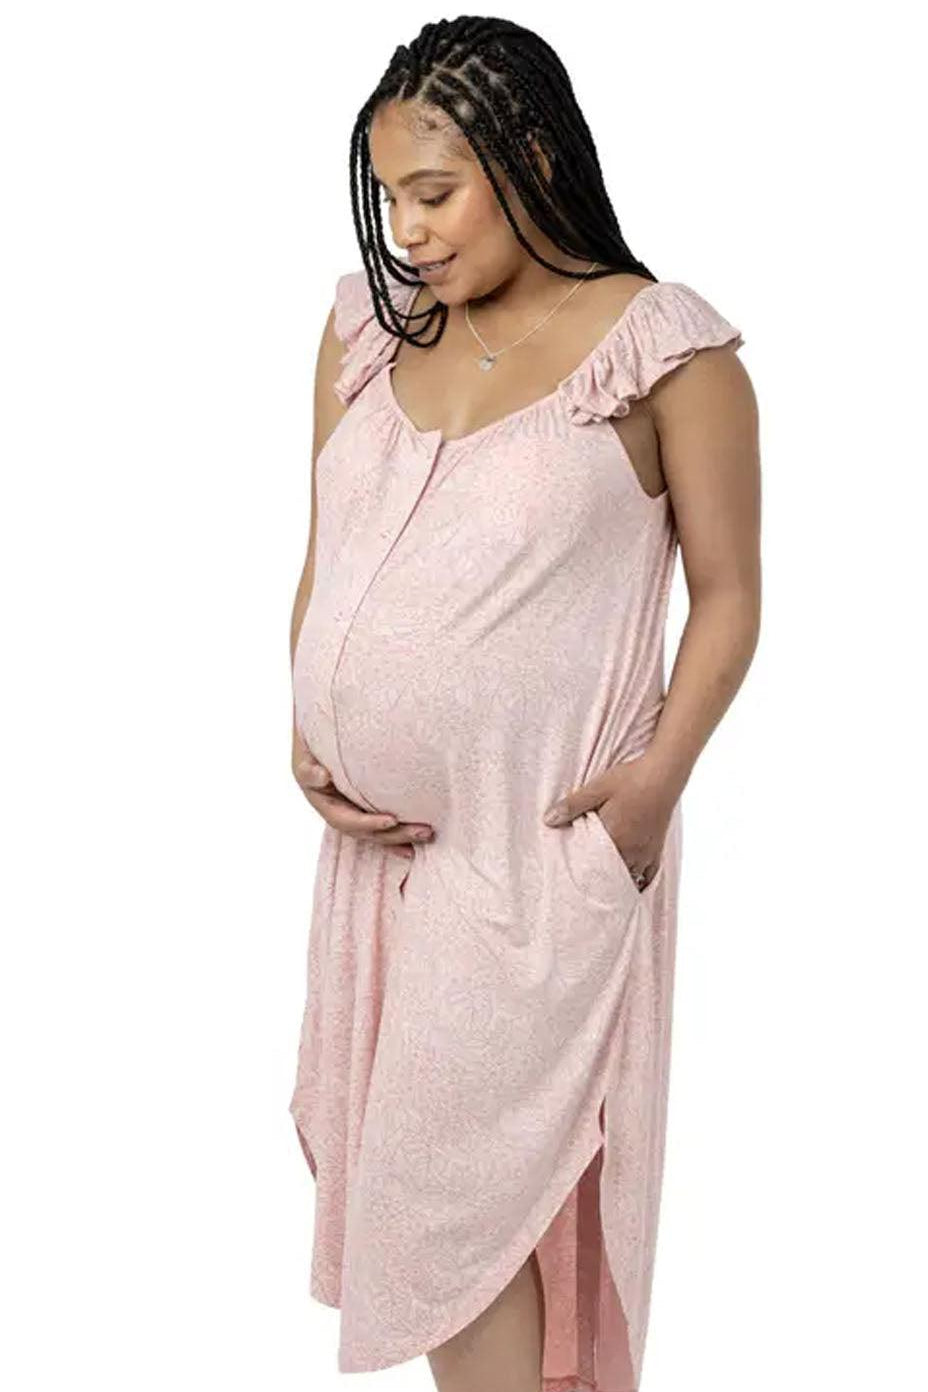 Ruffle Strap Labor & Delivery Gown | Pink Hydrangea Milk & Baby